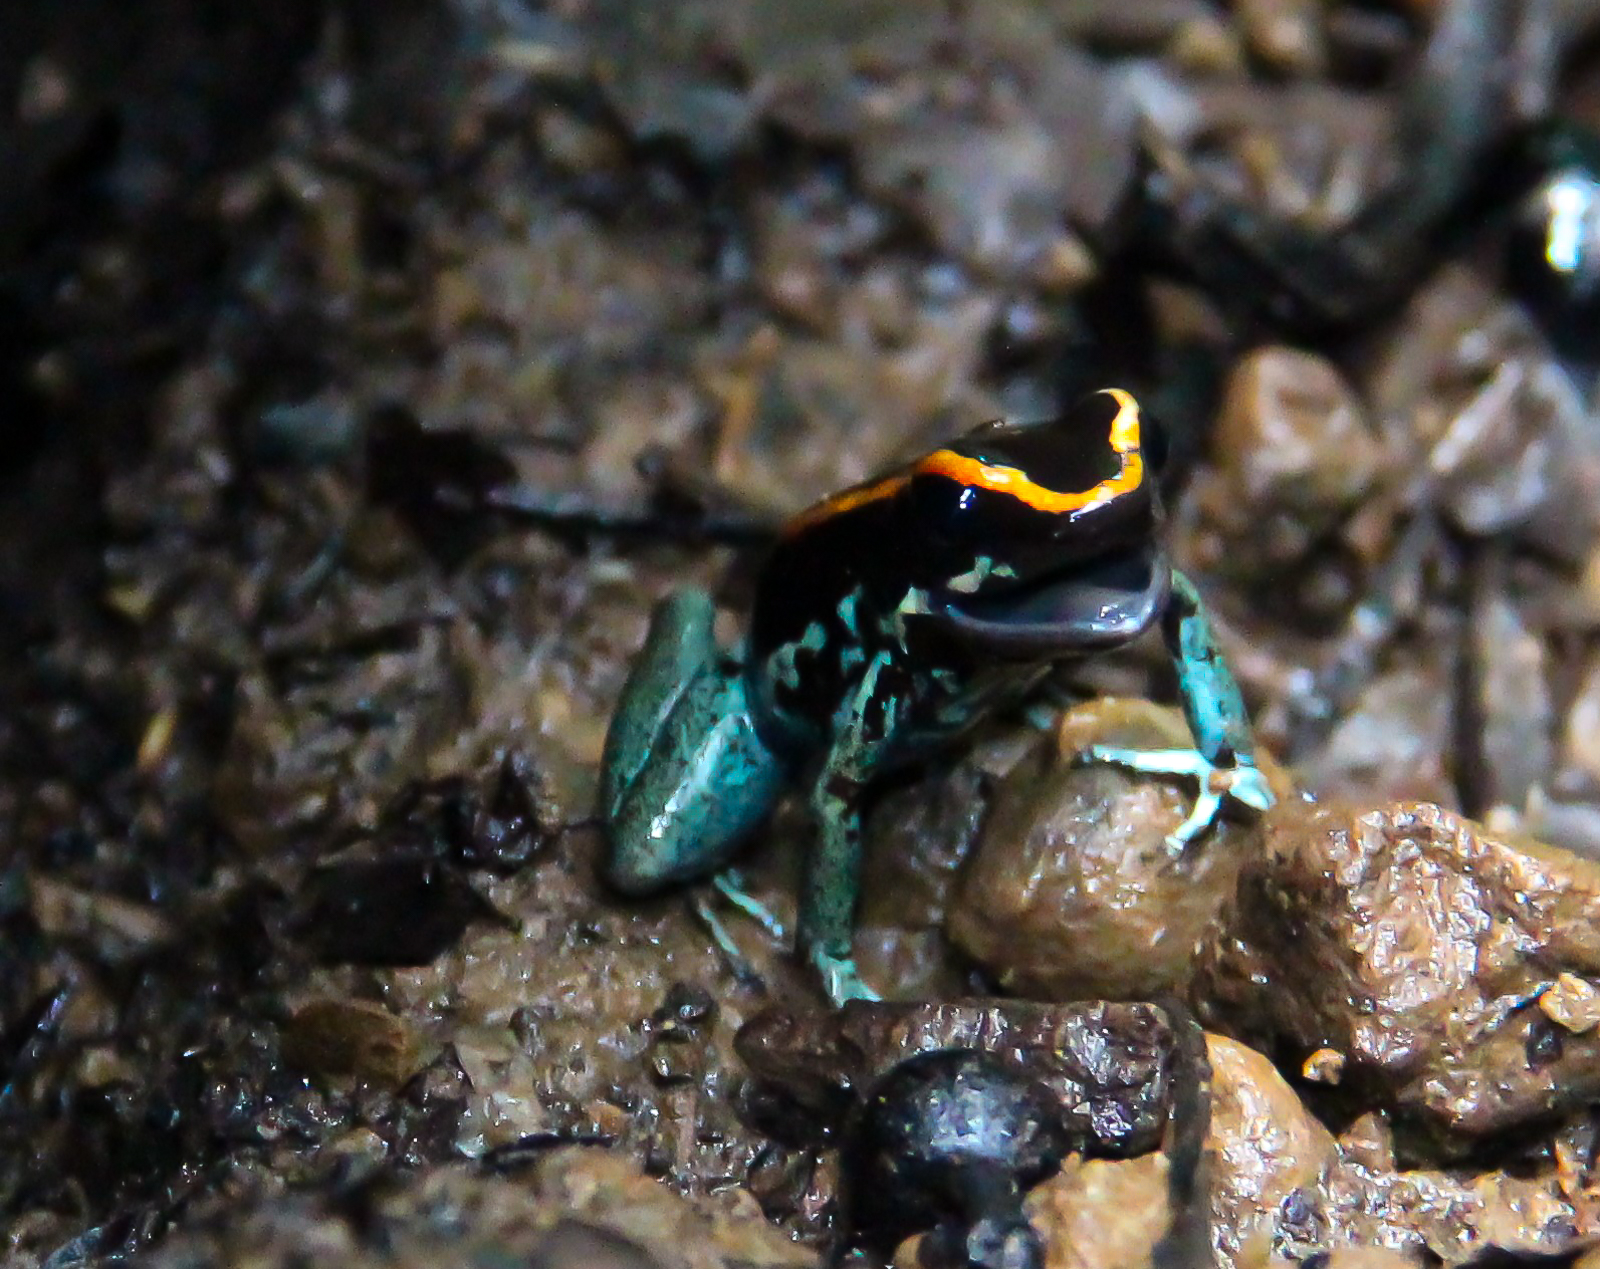 A poisonous Dart Frog of the Corcovado Forest photographed during a Wildlife Night Tour of Wild Trails Adventures